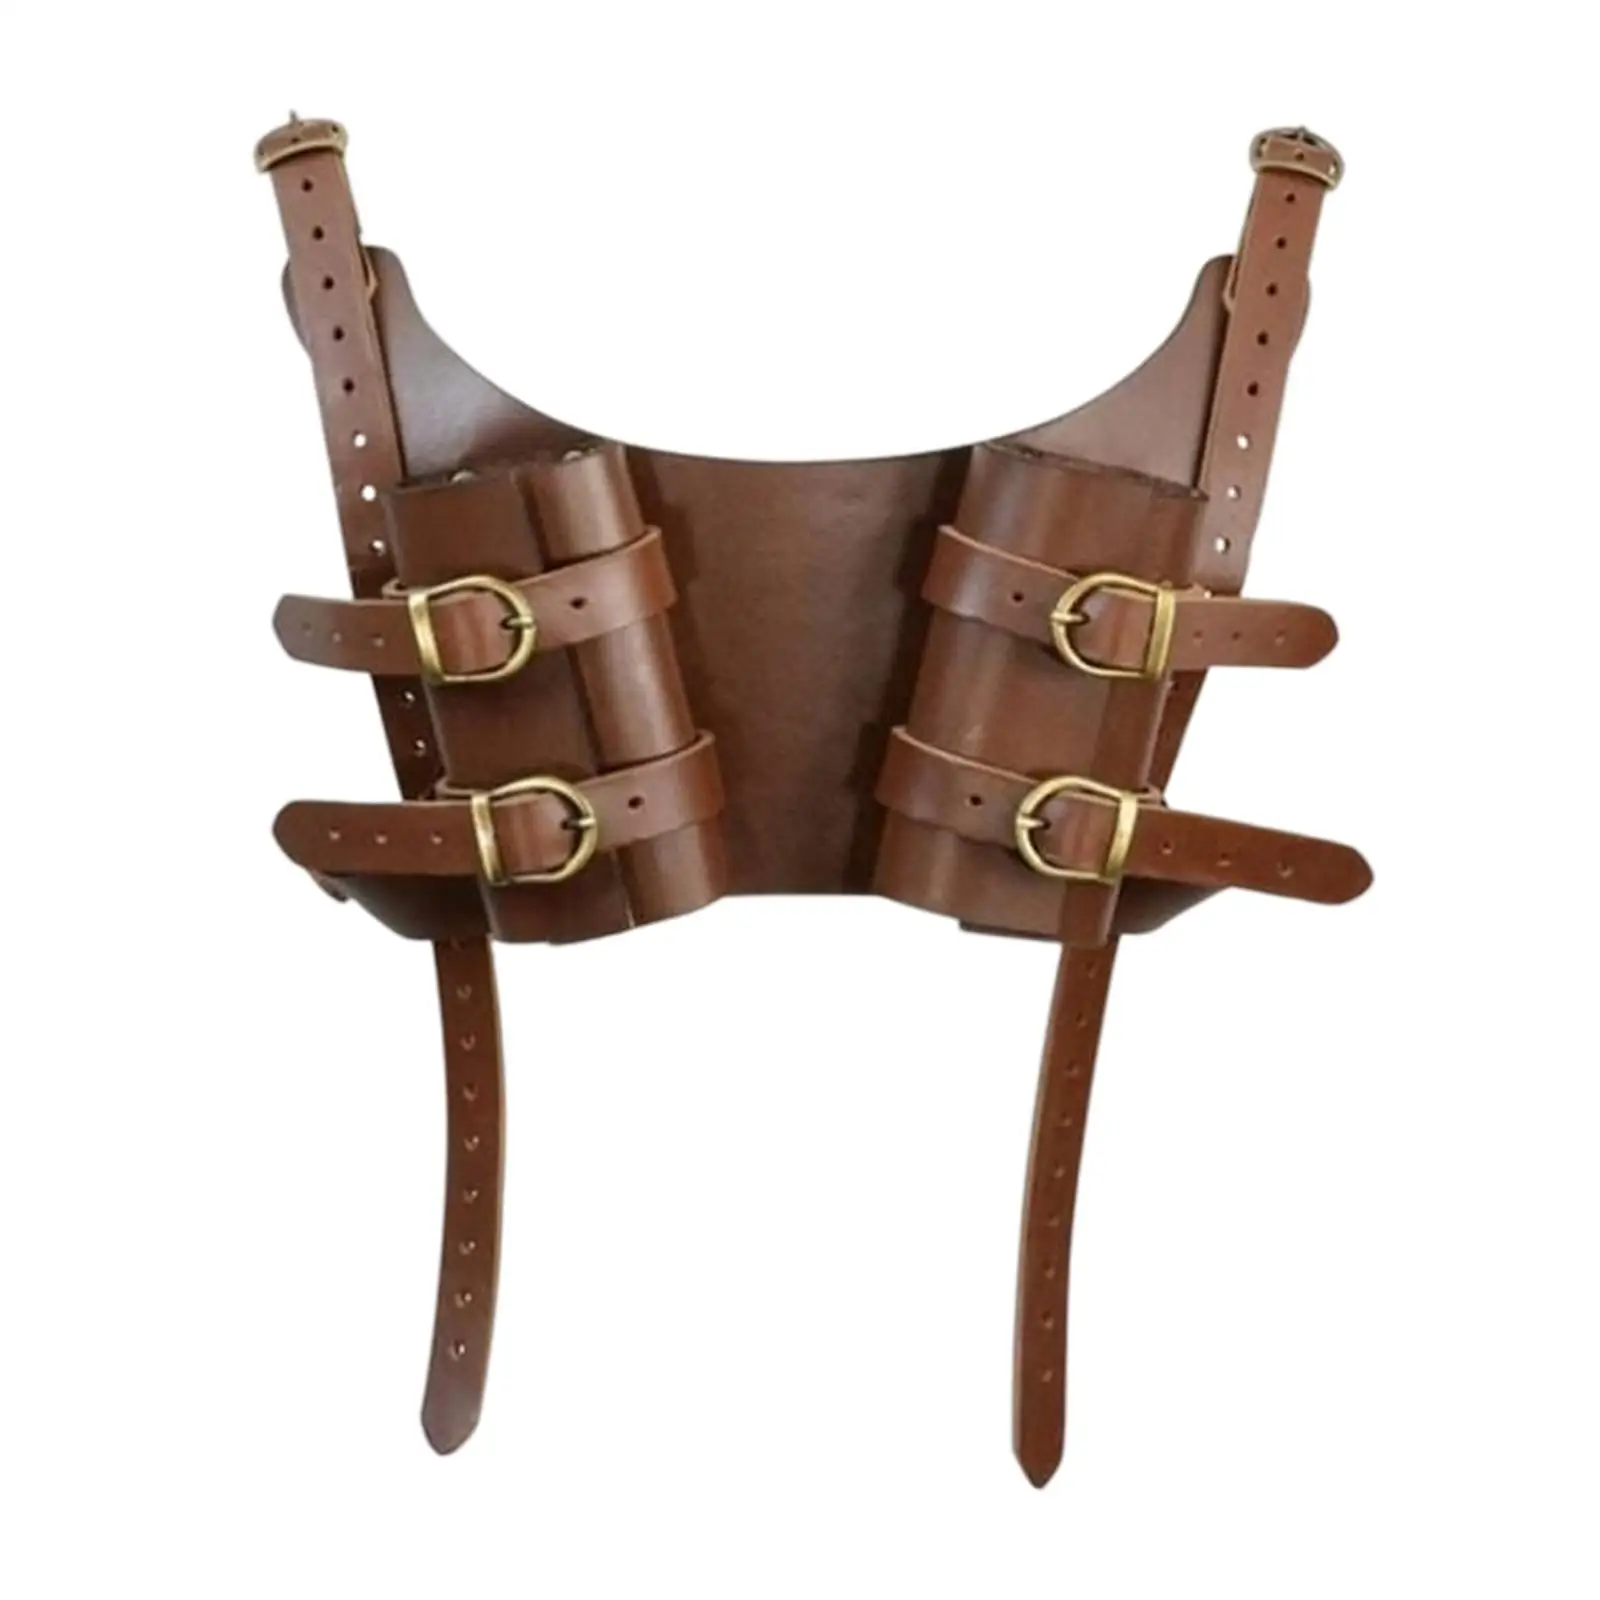 Double Medieval Shoulder Belt Cosplay Costume Sheath Bag Adjustable Props Sheath Scabbards for Knight Pirate Cosplay